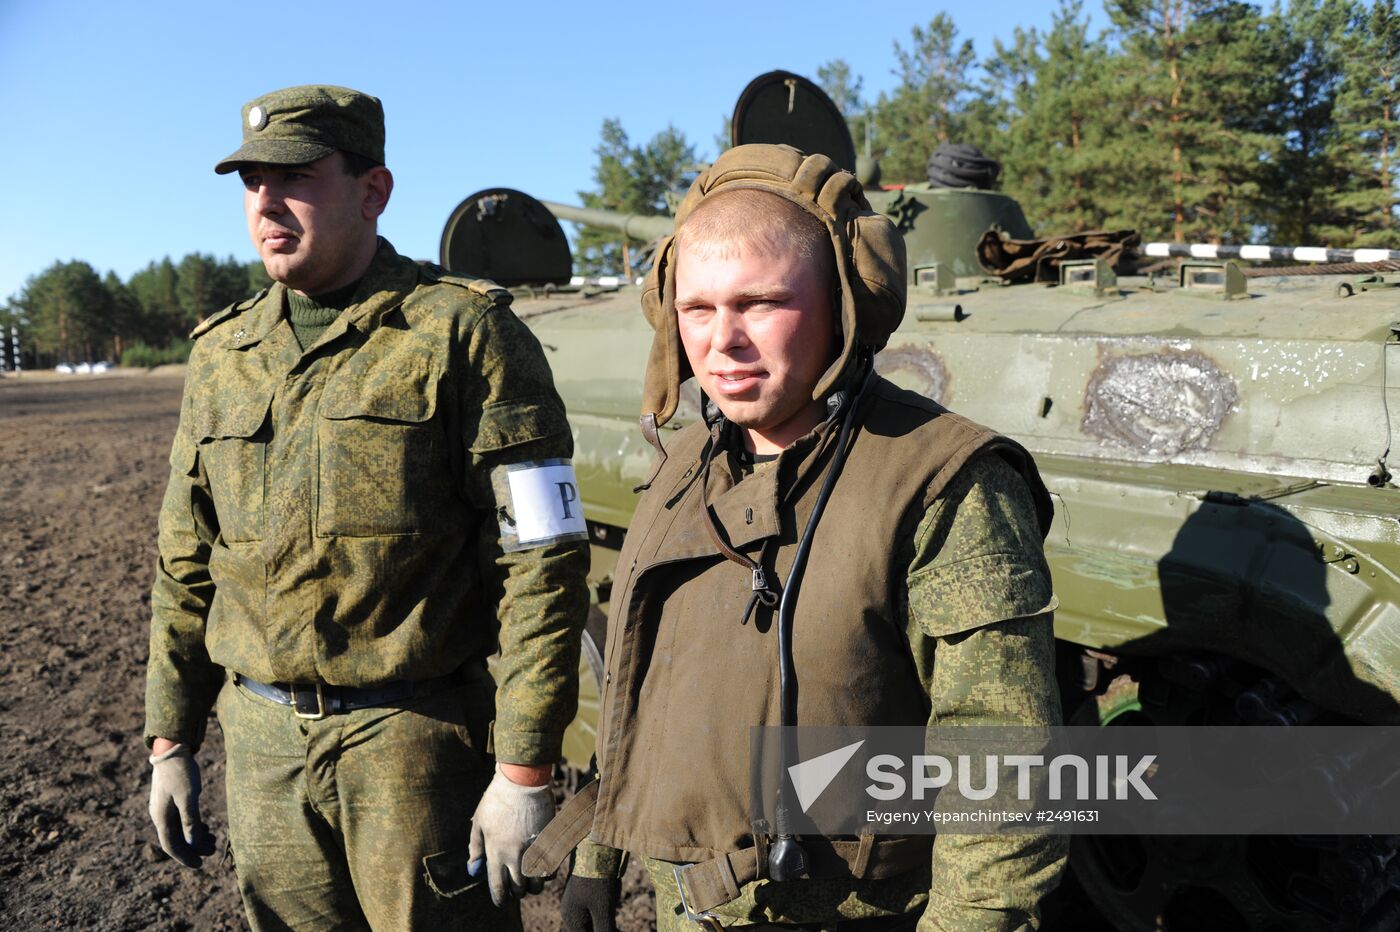 Practical training on water surface for mechanized infantry troops in Zabaikalye Territory